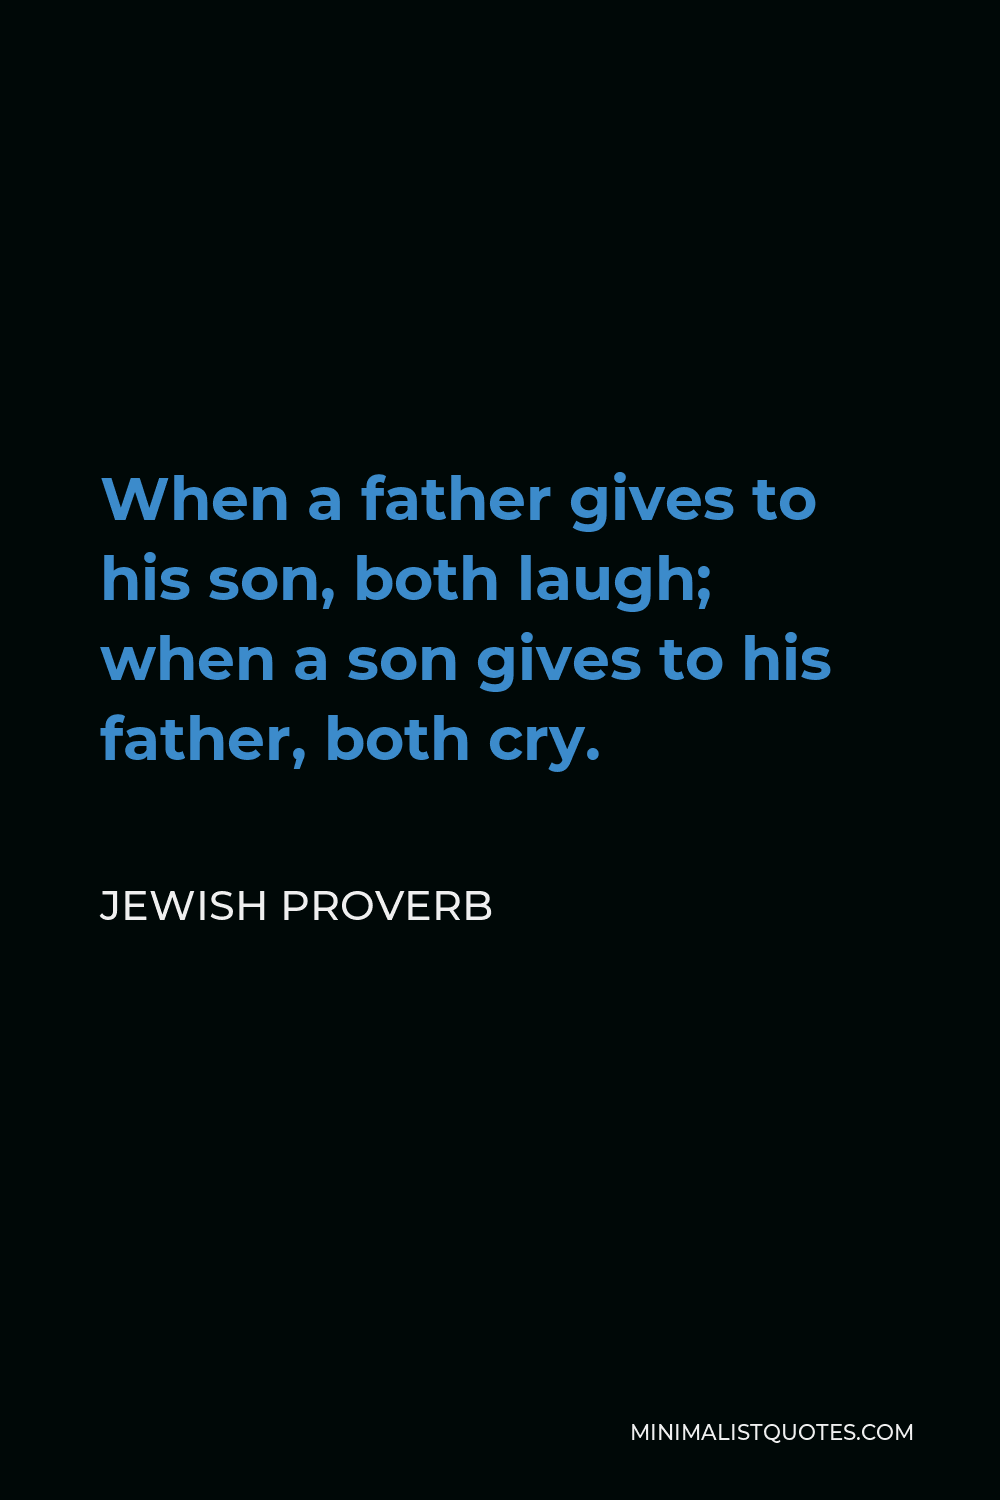 Jewish Proverb Quote - When a father gives to his son, both laugh; when a son gives to his father, both cry.